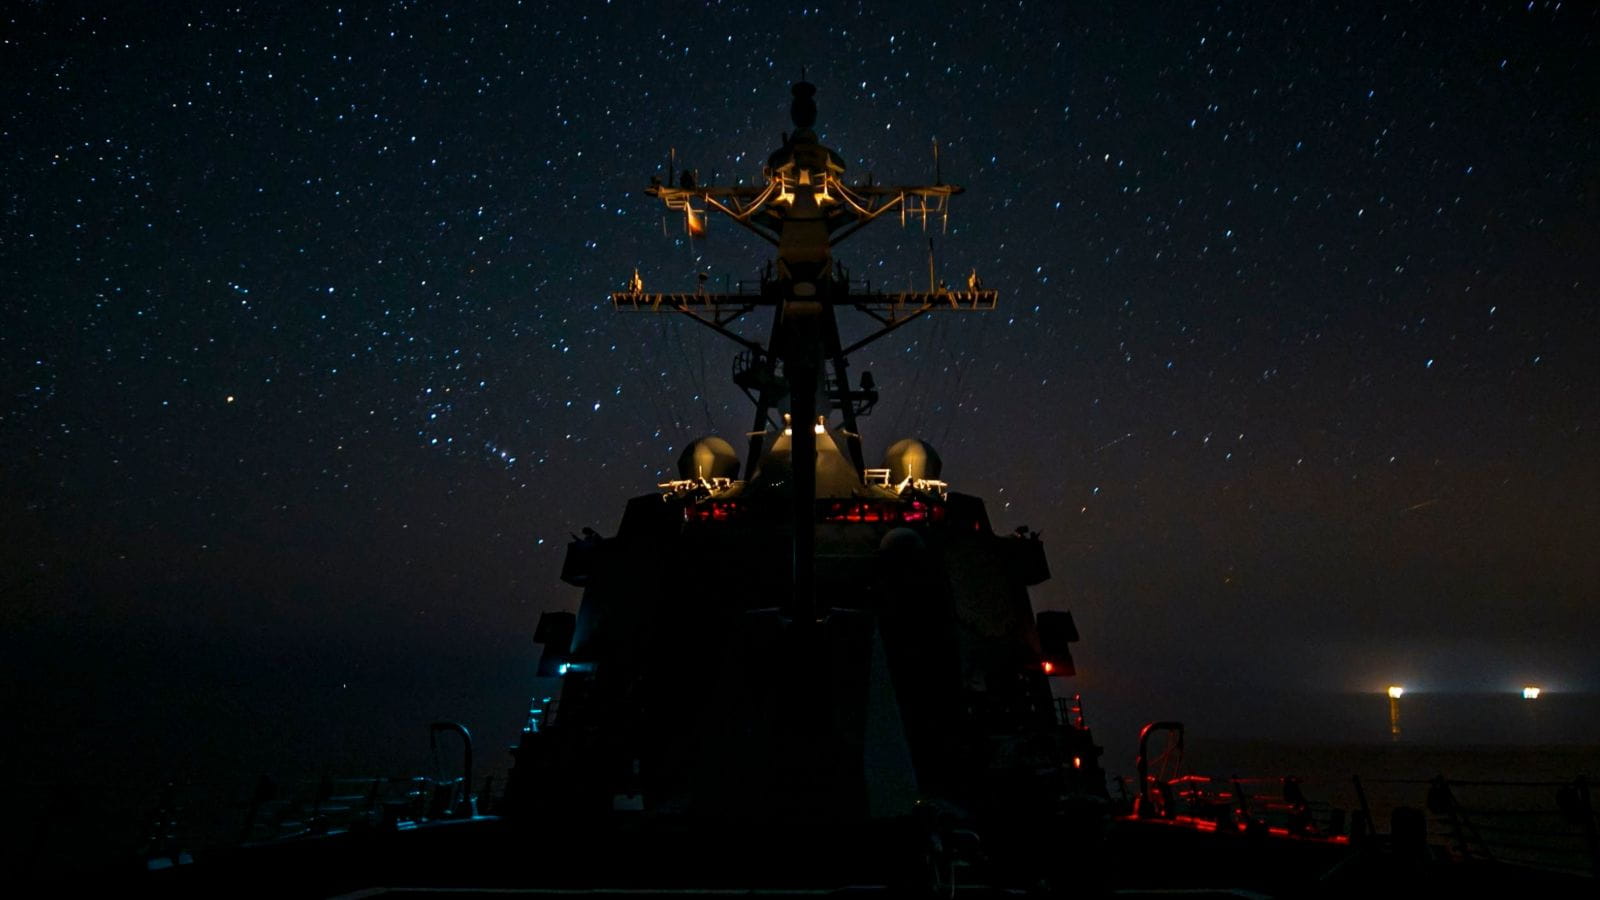 The guided-missile destroyer USS Delbert D. Black (DDG 119) operates in the Arabian Gulf. (U.S. Navy photo)